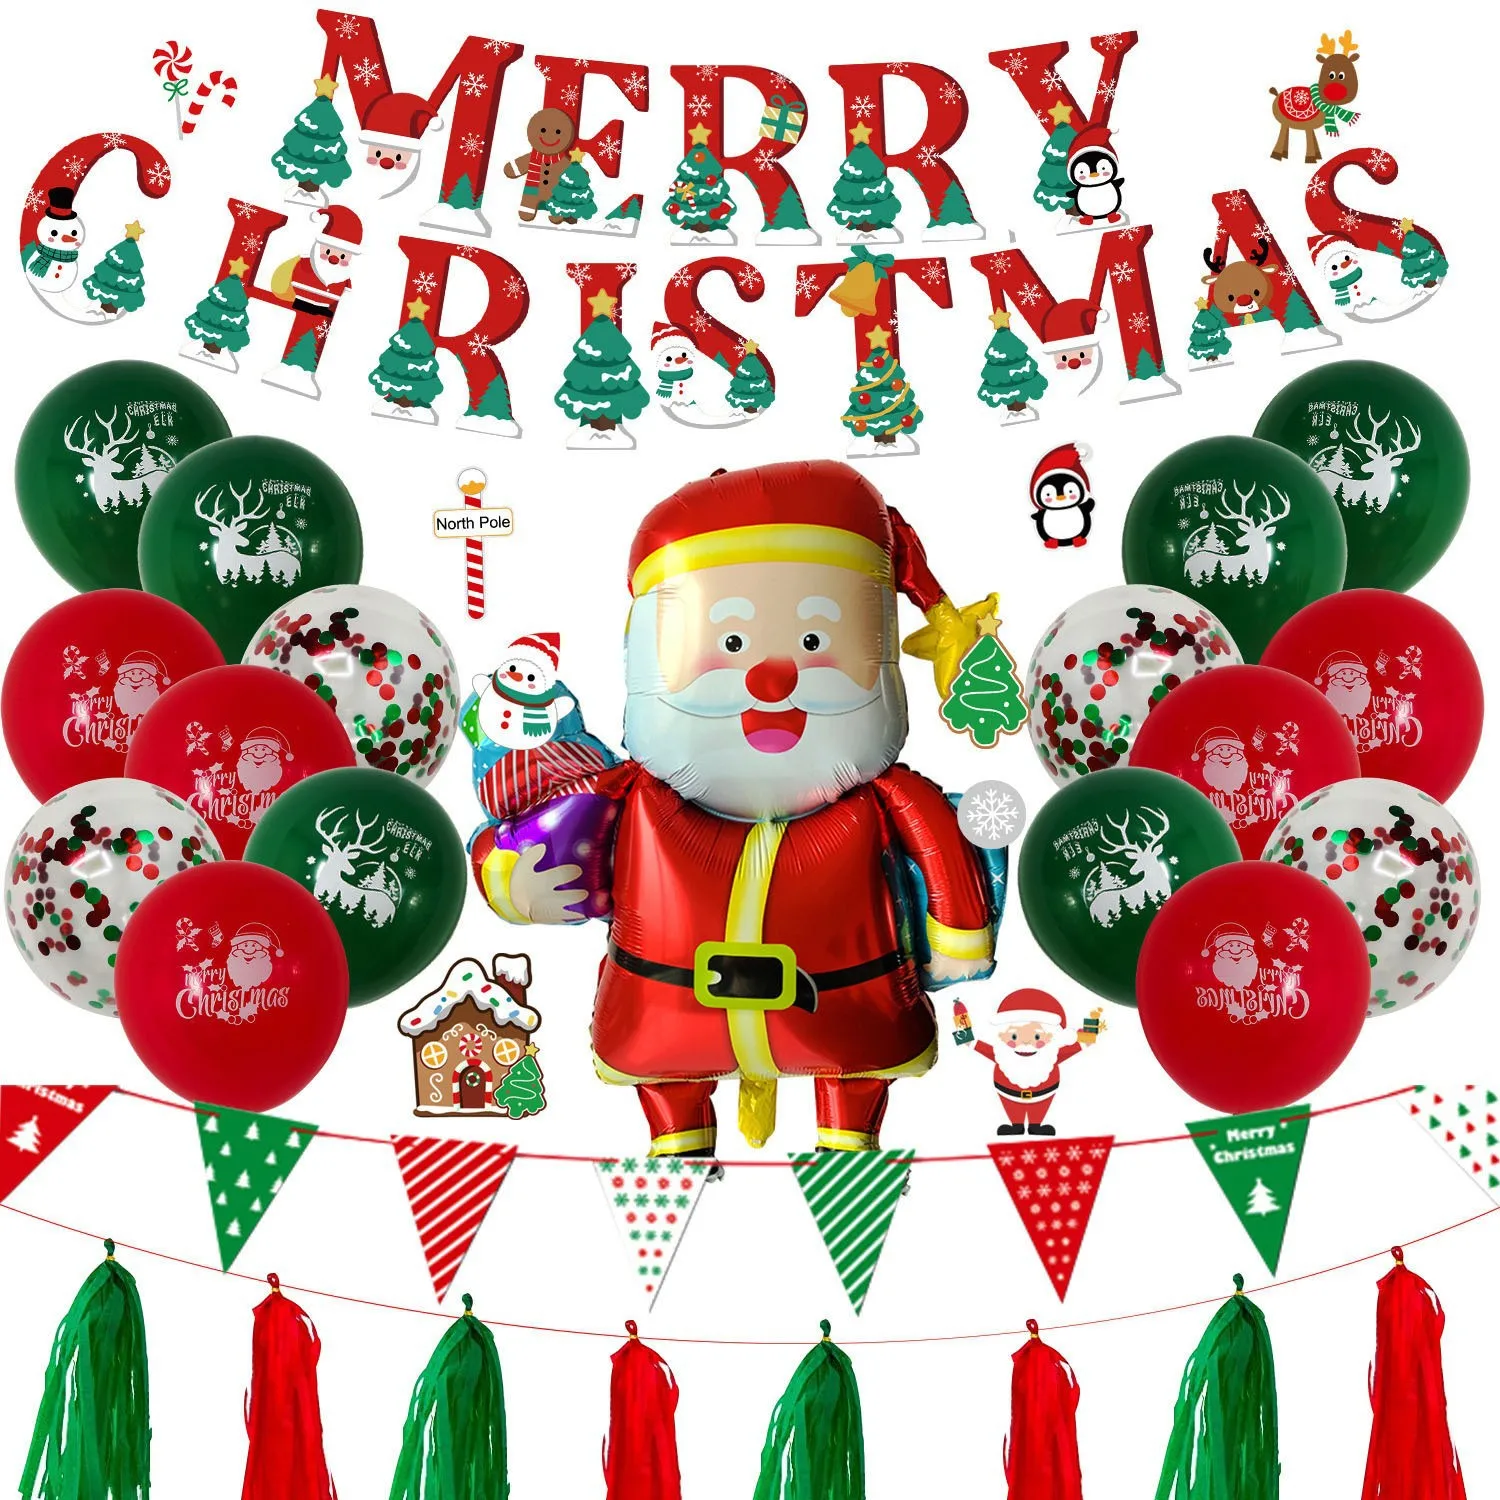 Christmas Balloon Balloon Decoration 10 Inch Round Latex Christmas Pull Flag Combination Christmas Party Balloon Home Decoration